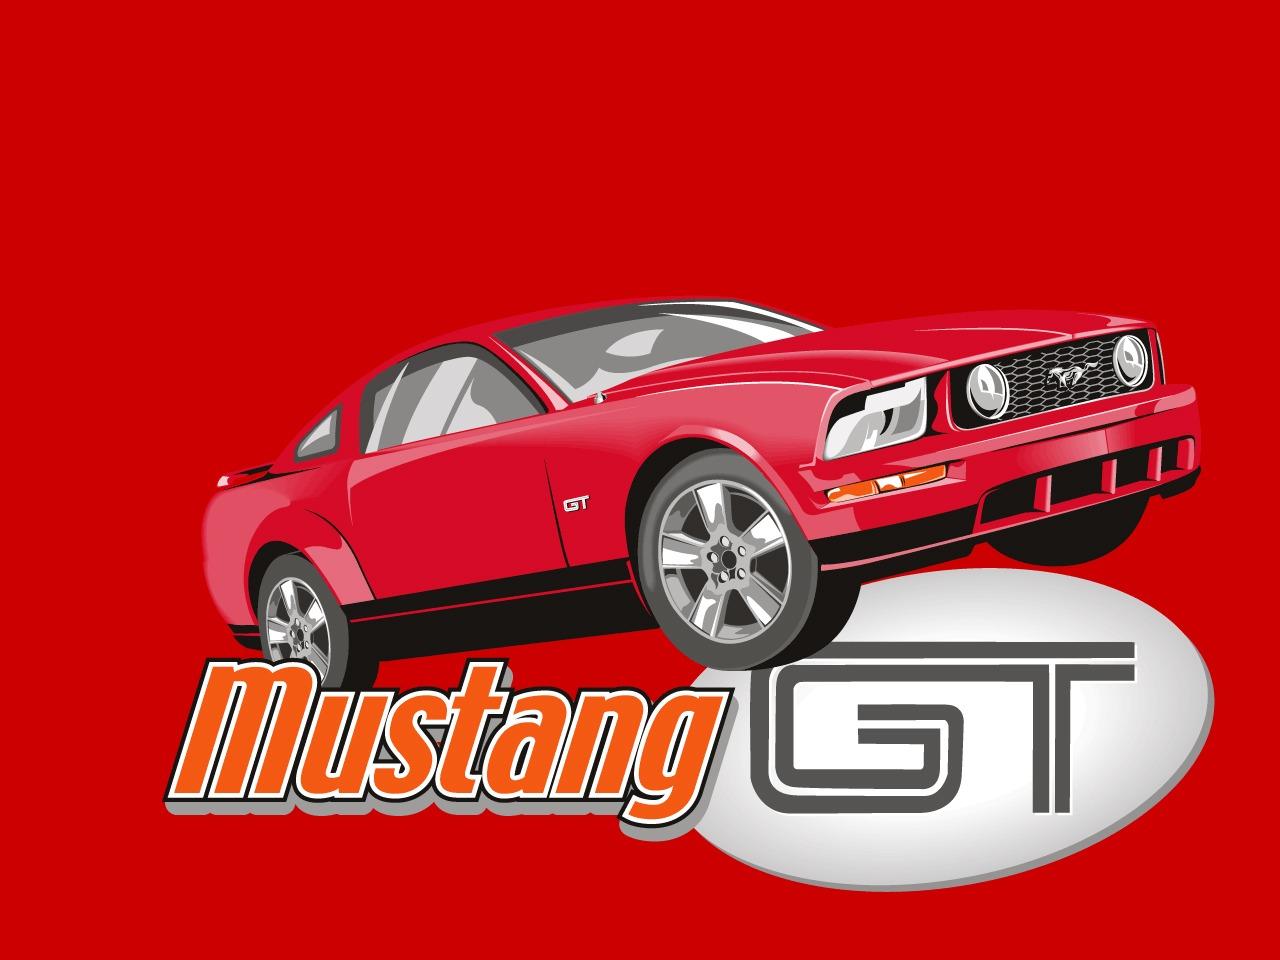 Mustang GT. Ford Mustang Photo Gallery